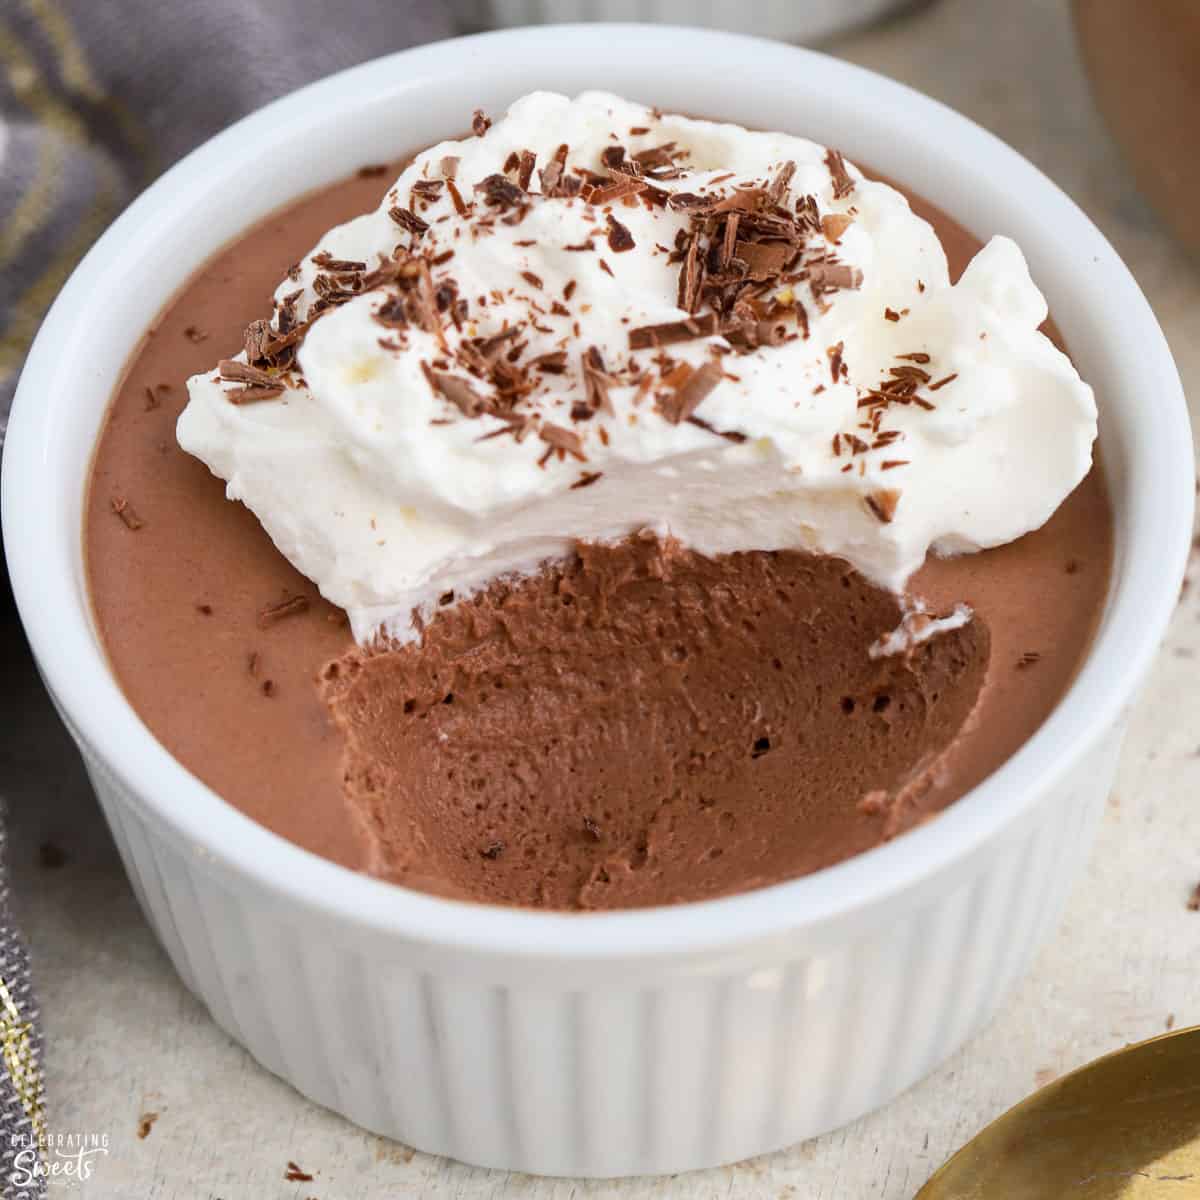 Decadent Chocolate Mousse: A Silky and Indulgent Dessert